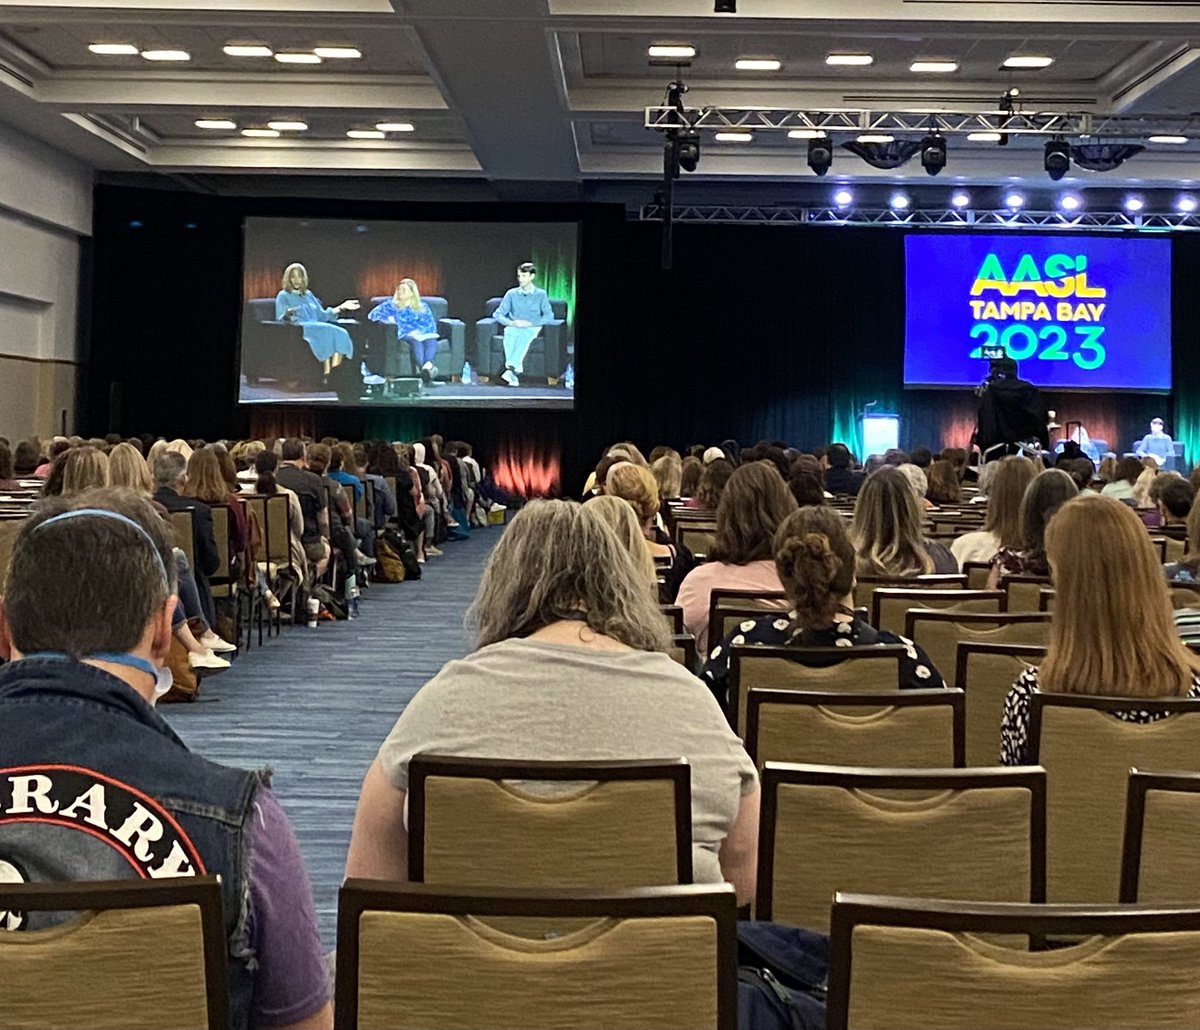 Did you know that research conducted shows that reading scores increase when diverse books are added to libraries? This was mentioned in the opening session today at #AASL23. Search online to see the articles about it.